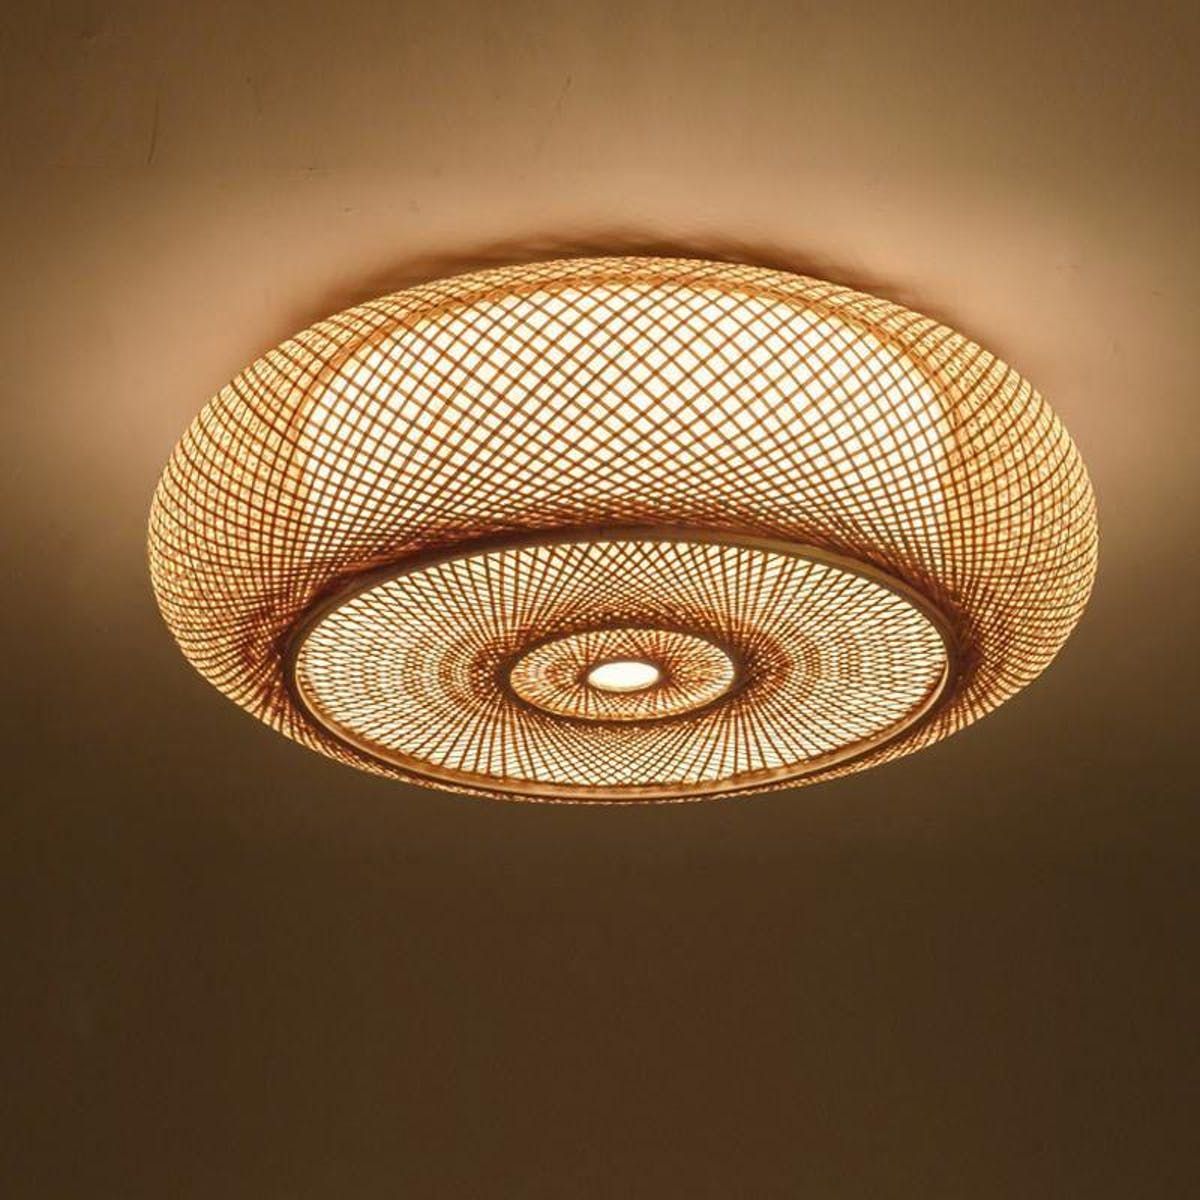 Less Flashy Bedroom Ceiling Lights